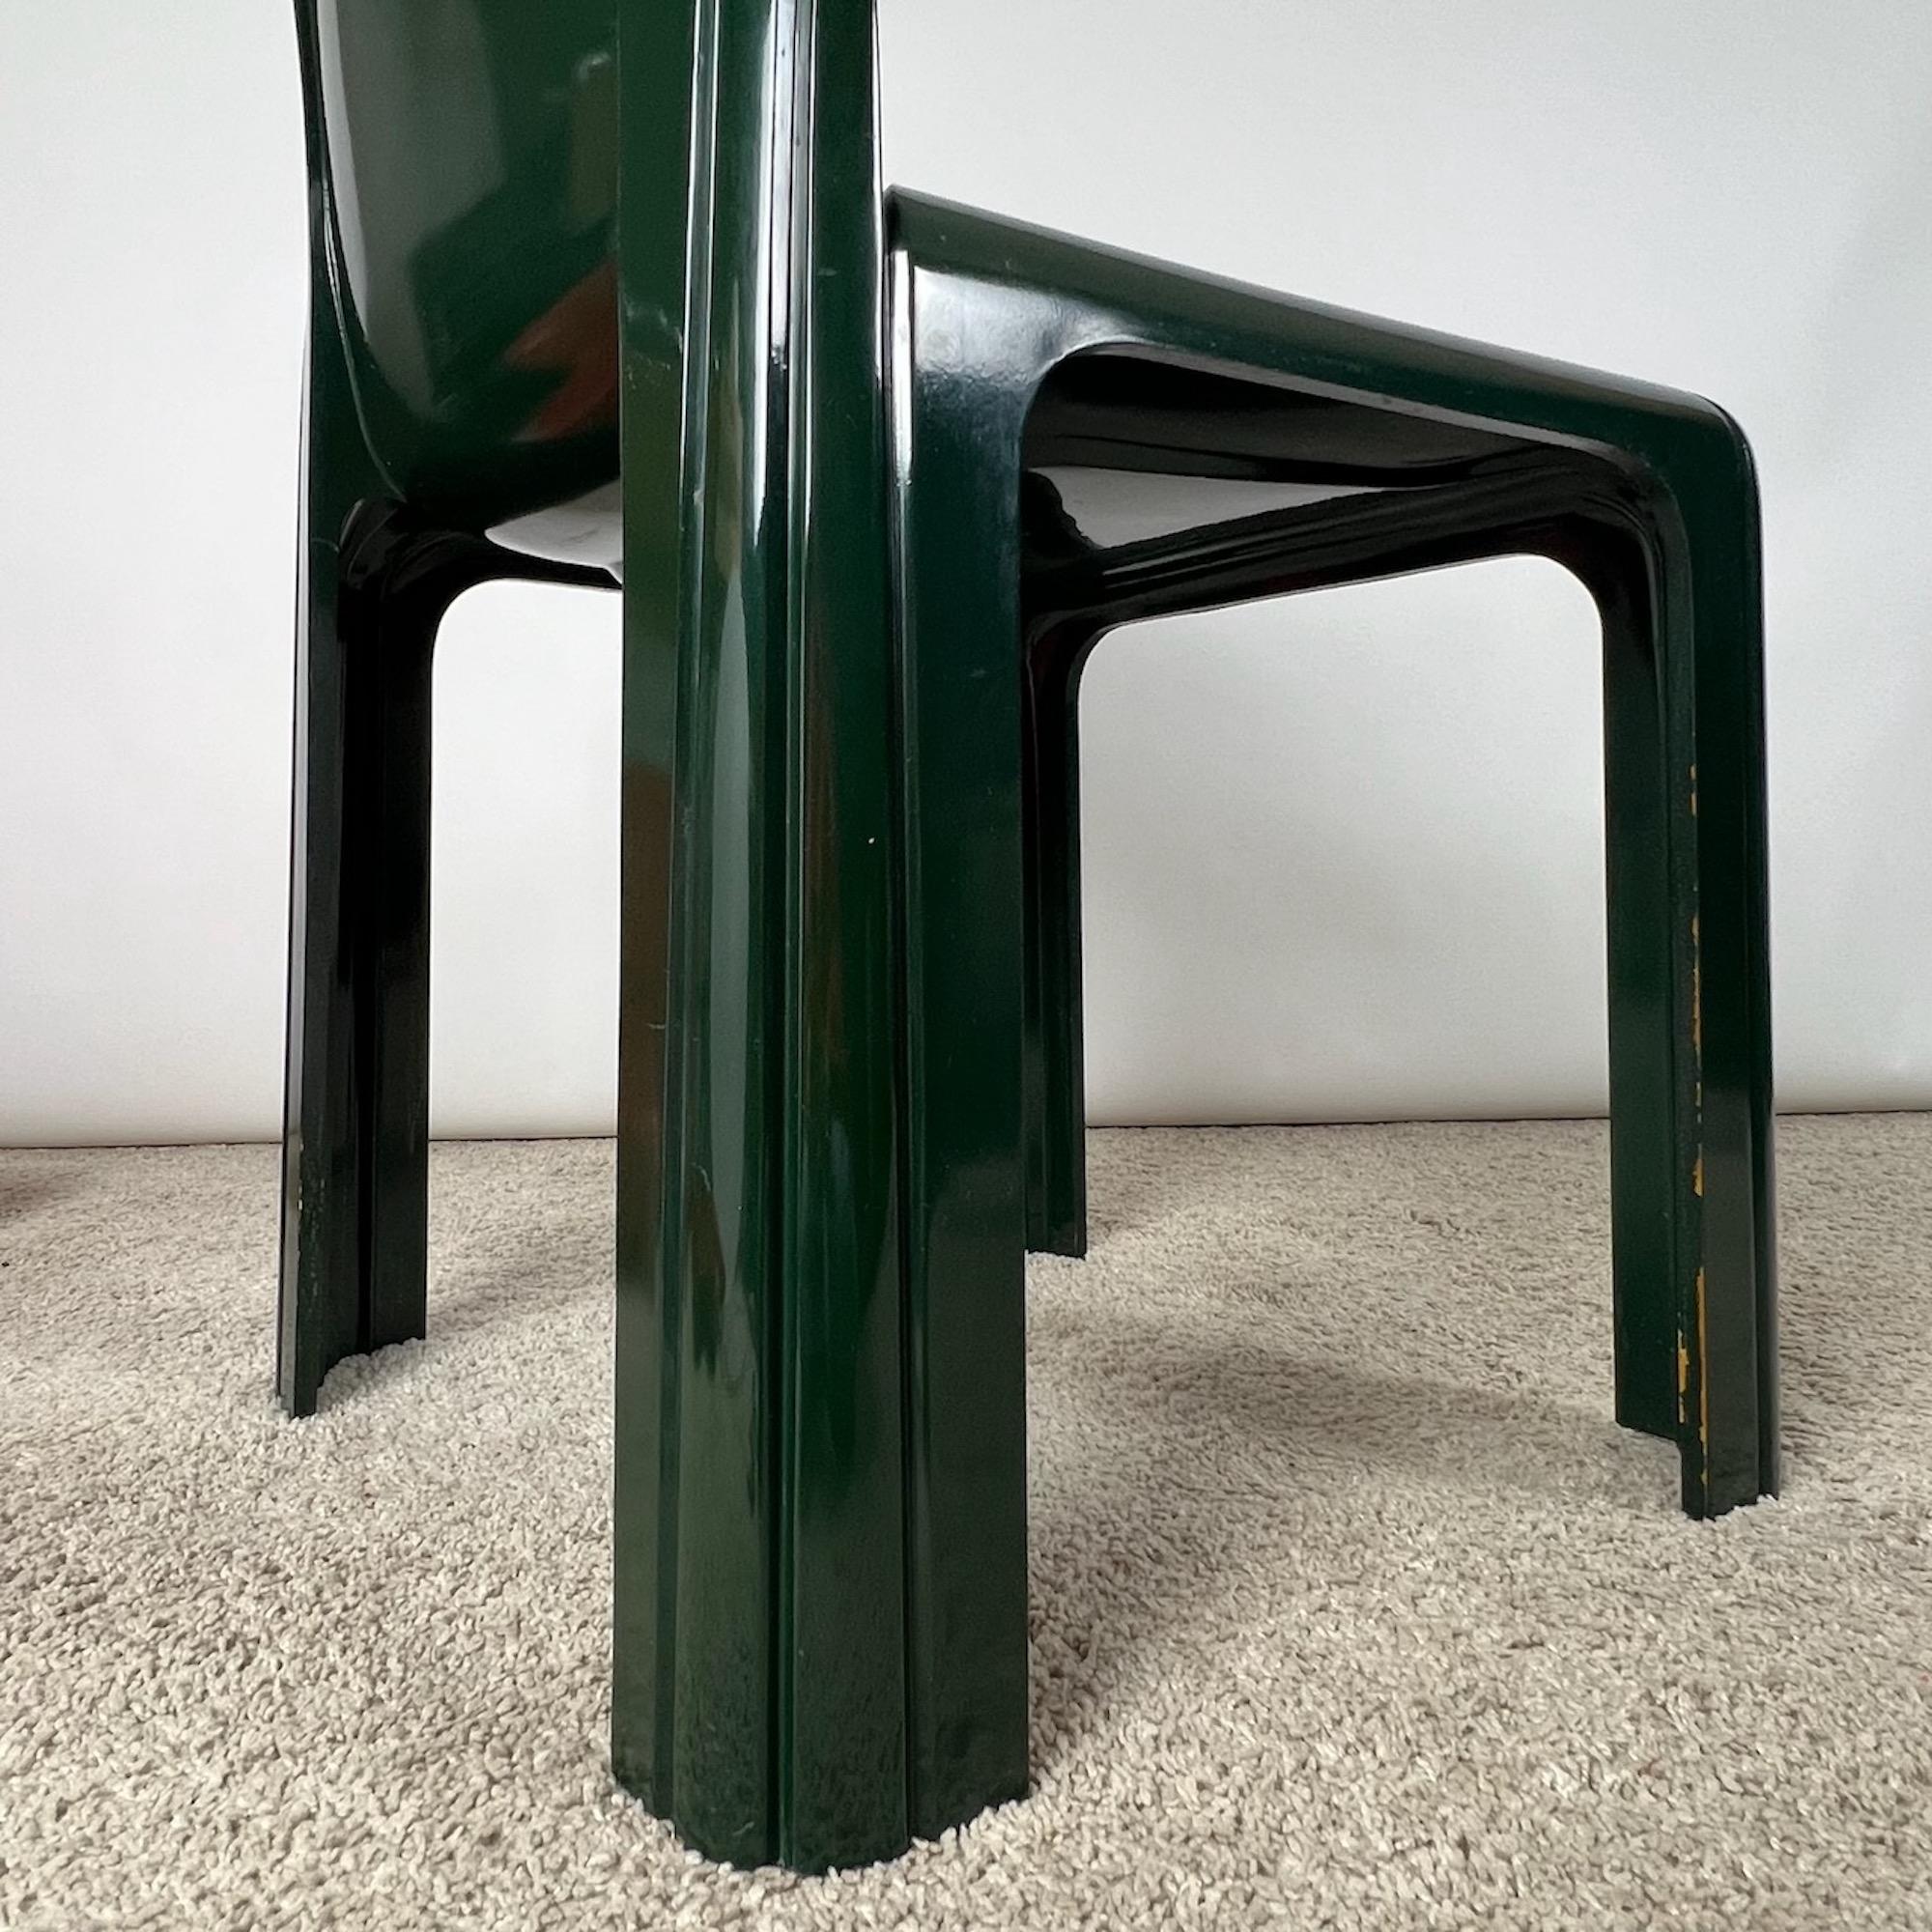 Set of 4 Green Resin Kartell Model 4854 Chairs by Gae Aulenti, 1960s For Sale 3